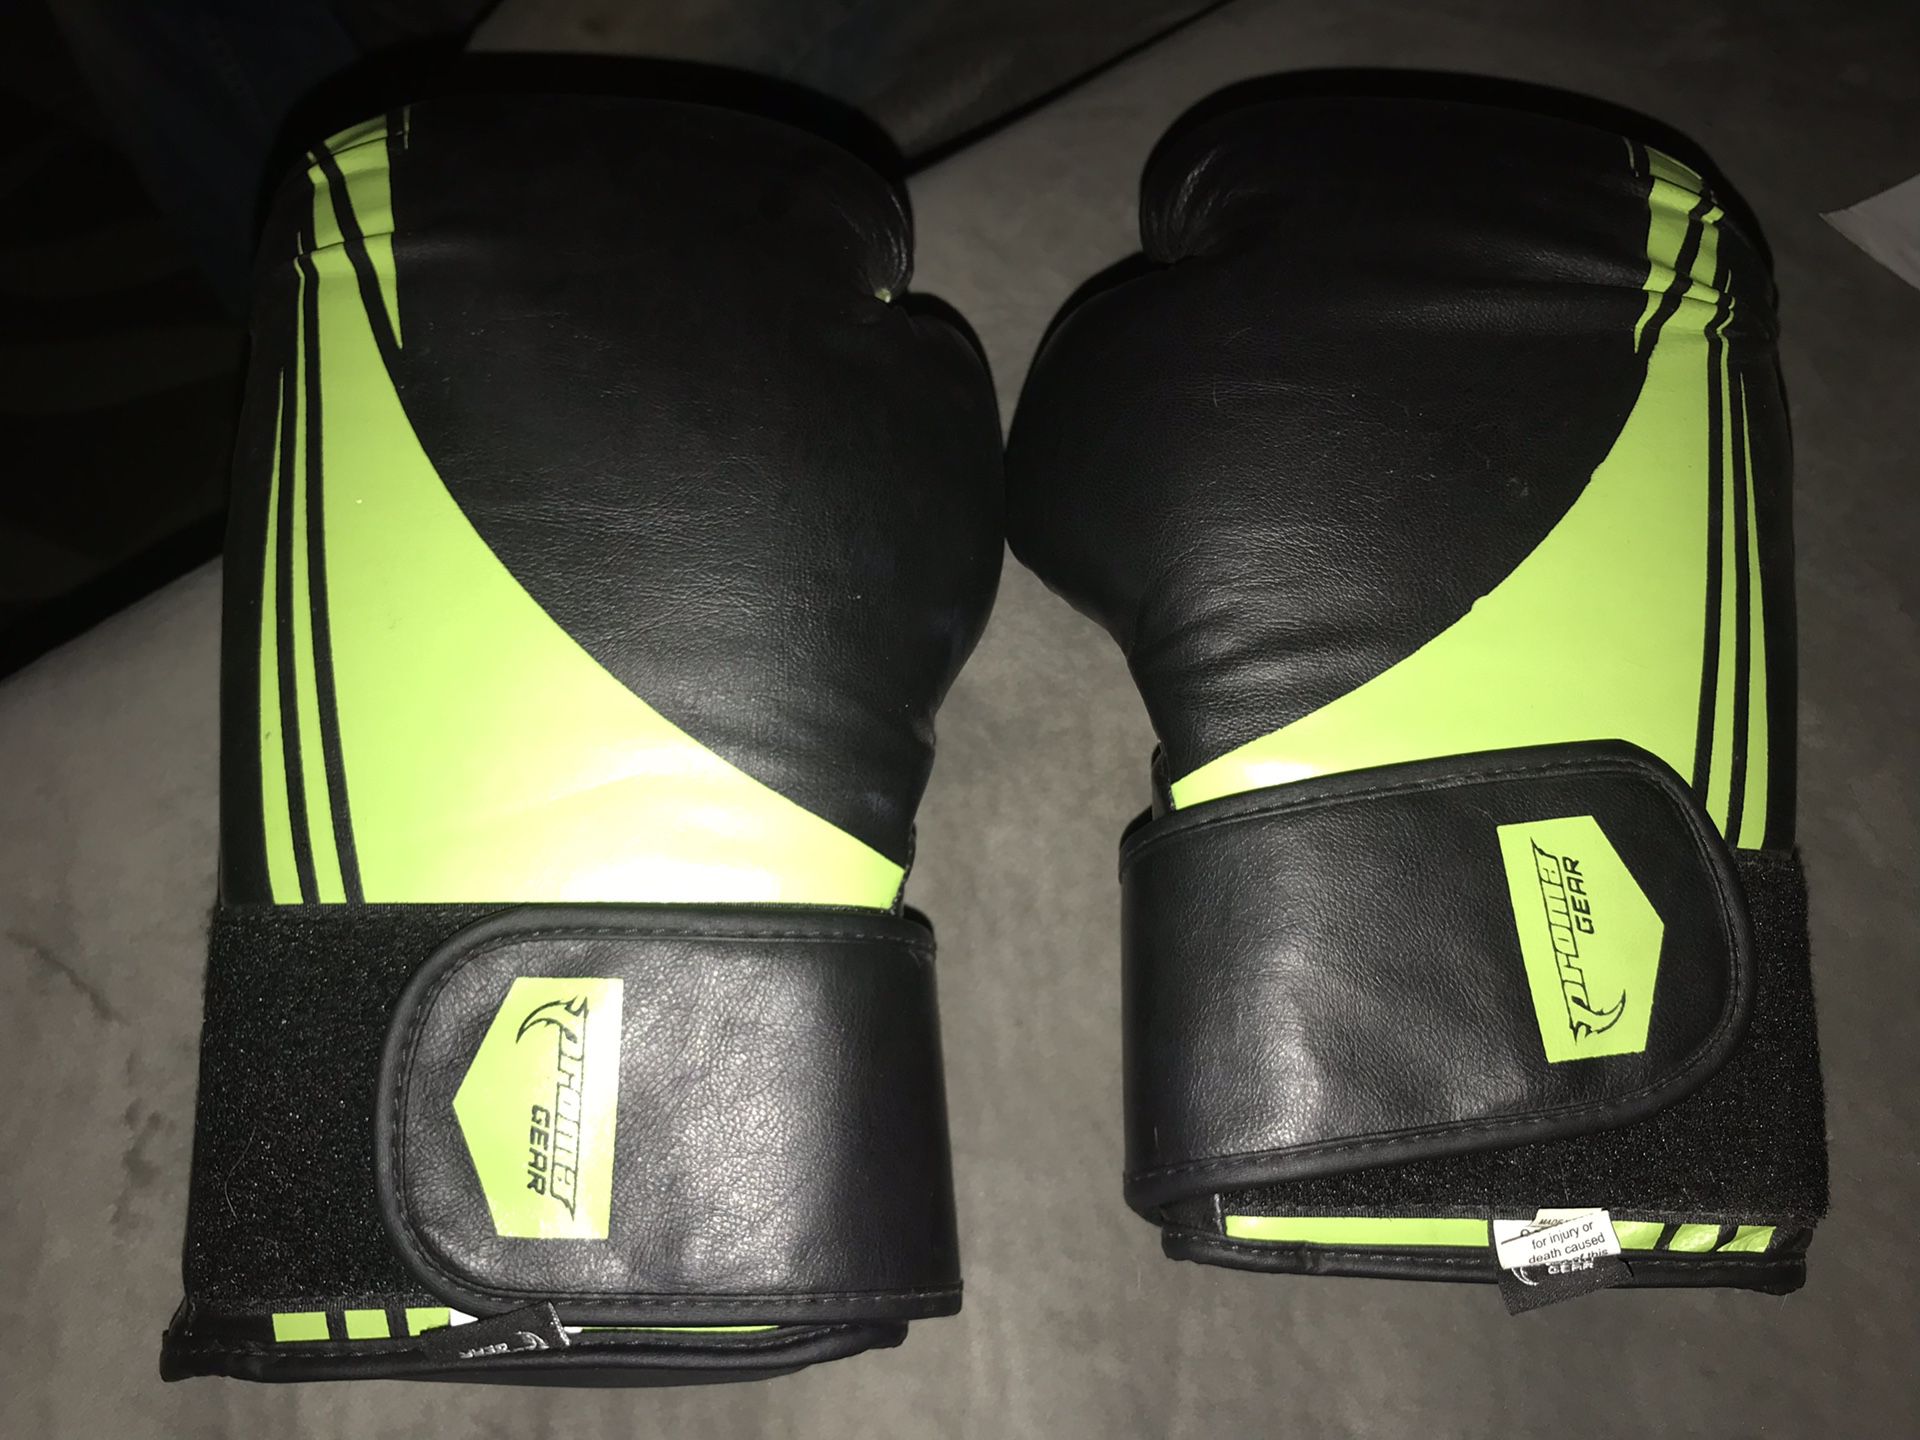 Proma gear boxing gloves